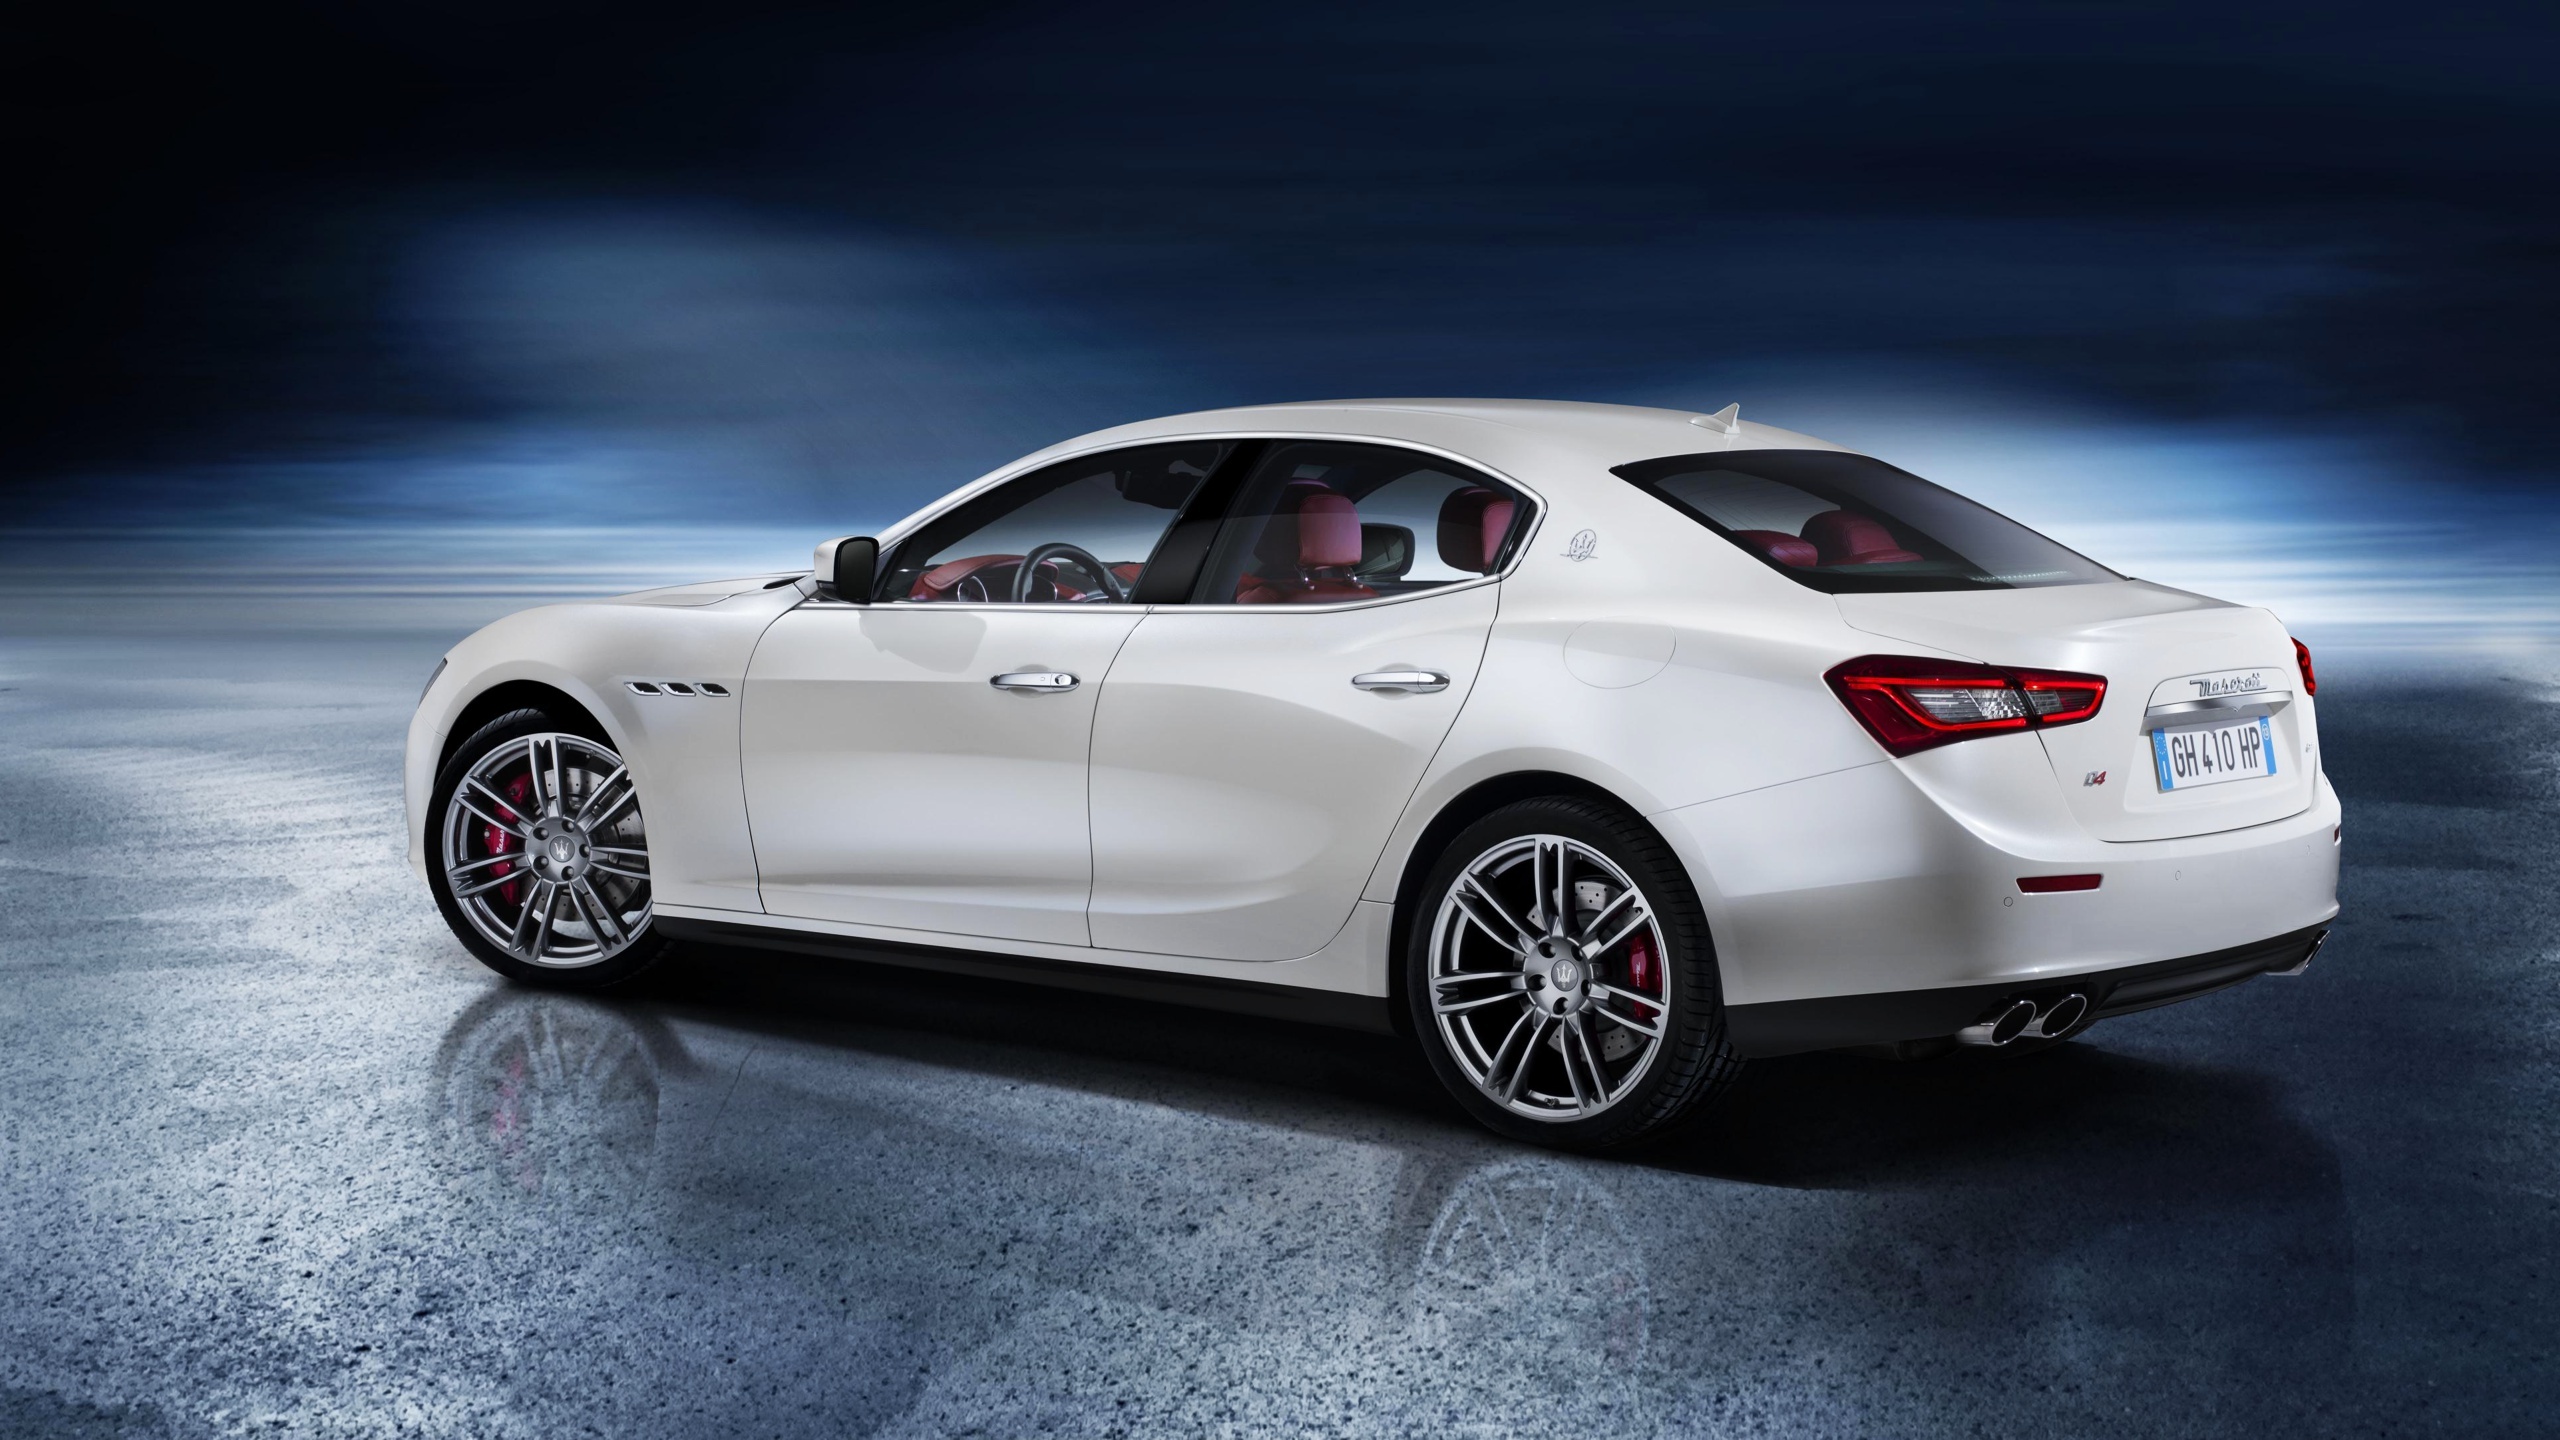 Maserati Ghibli, New model on HD wallpapers, Tablet and mobile compatible, 2560x1440 HD Desktop